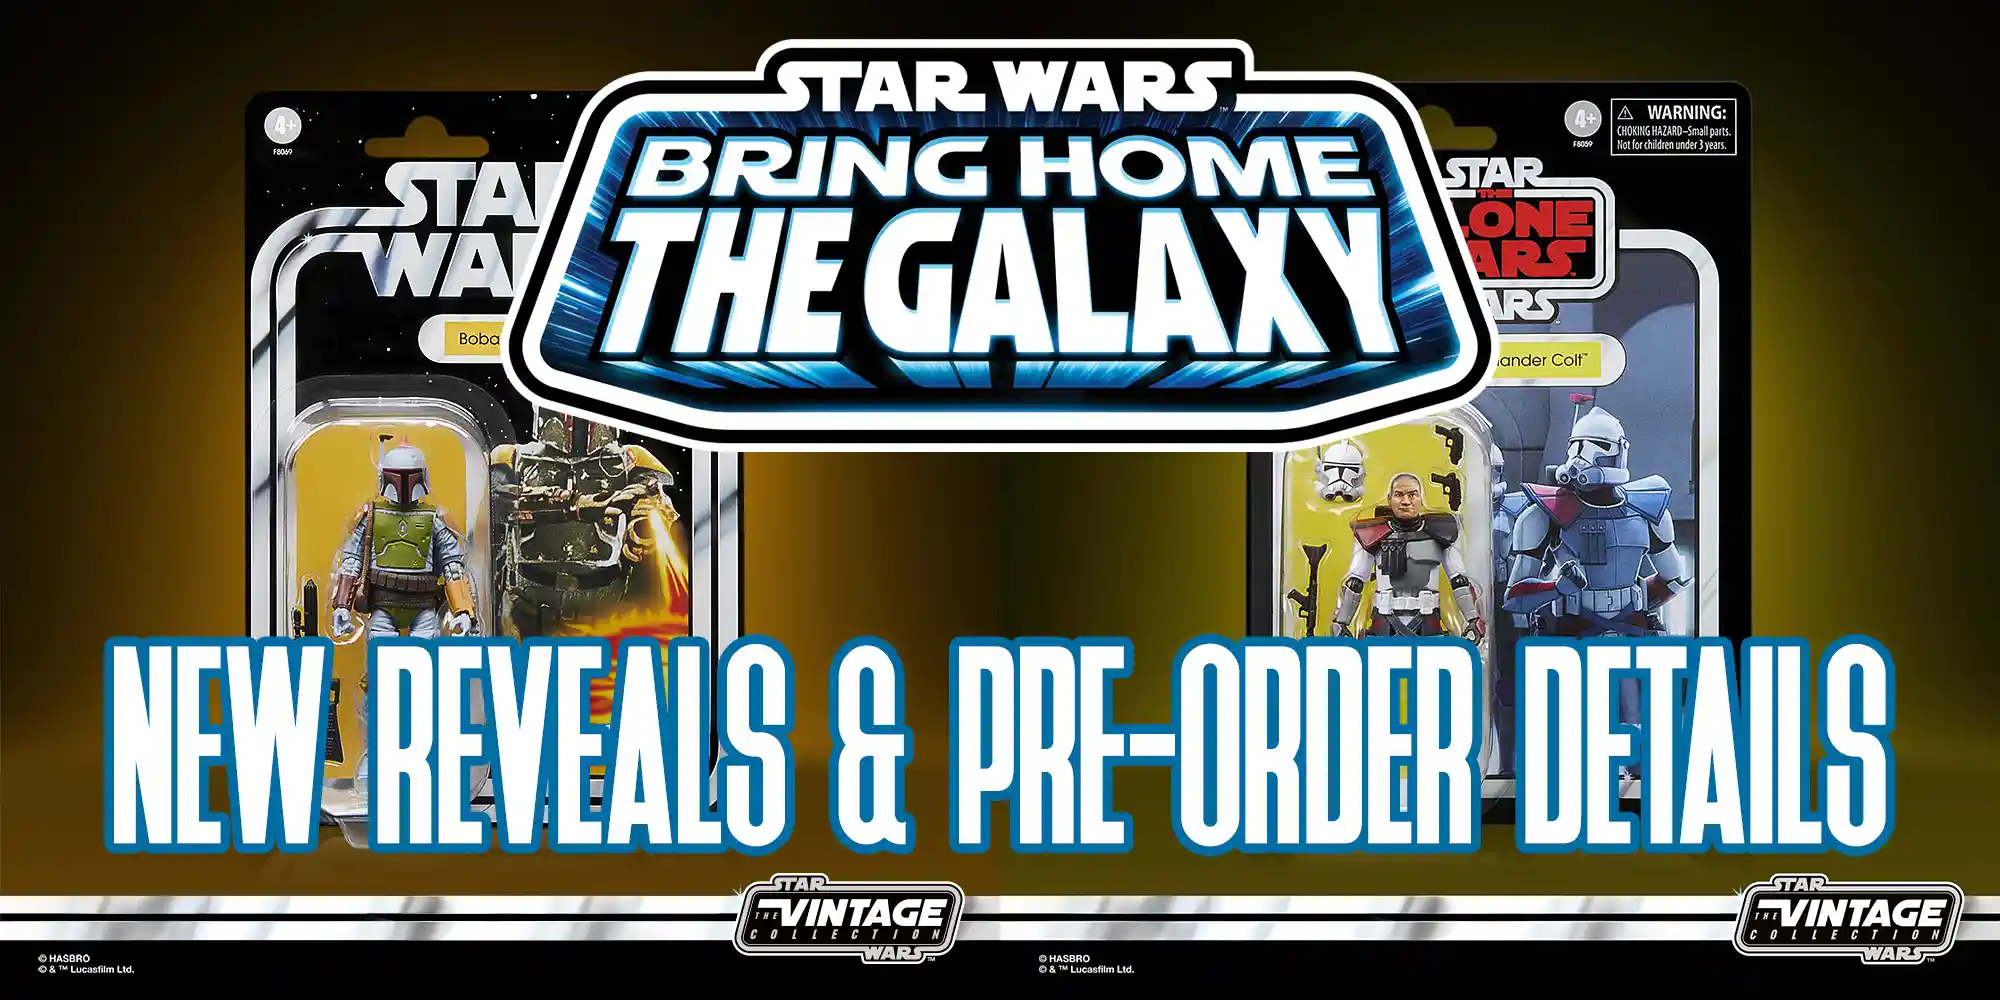 Bring Home The Galaxy Reveals And PreOrder Details